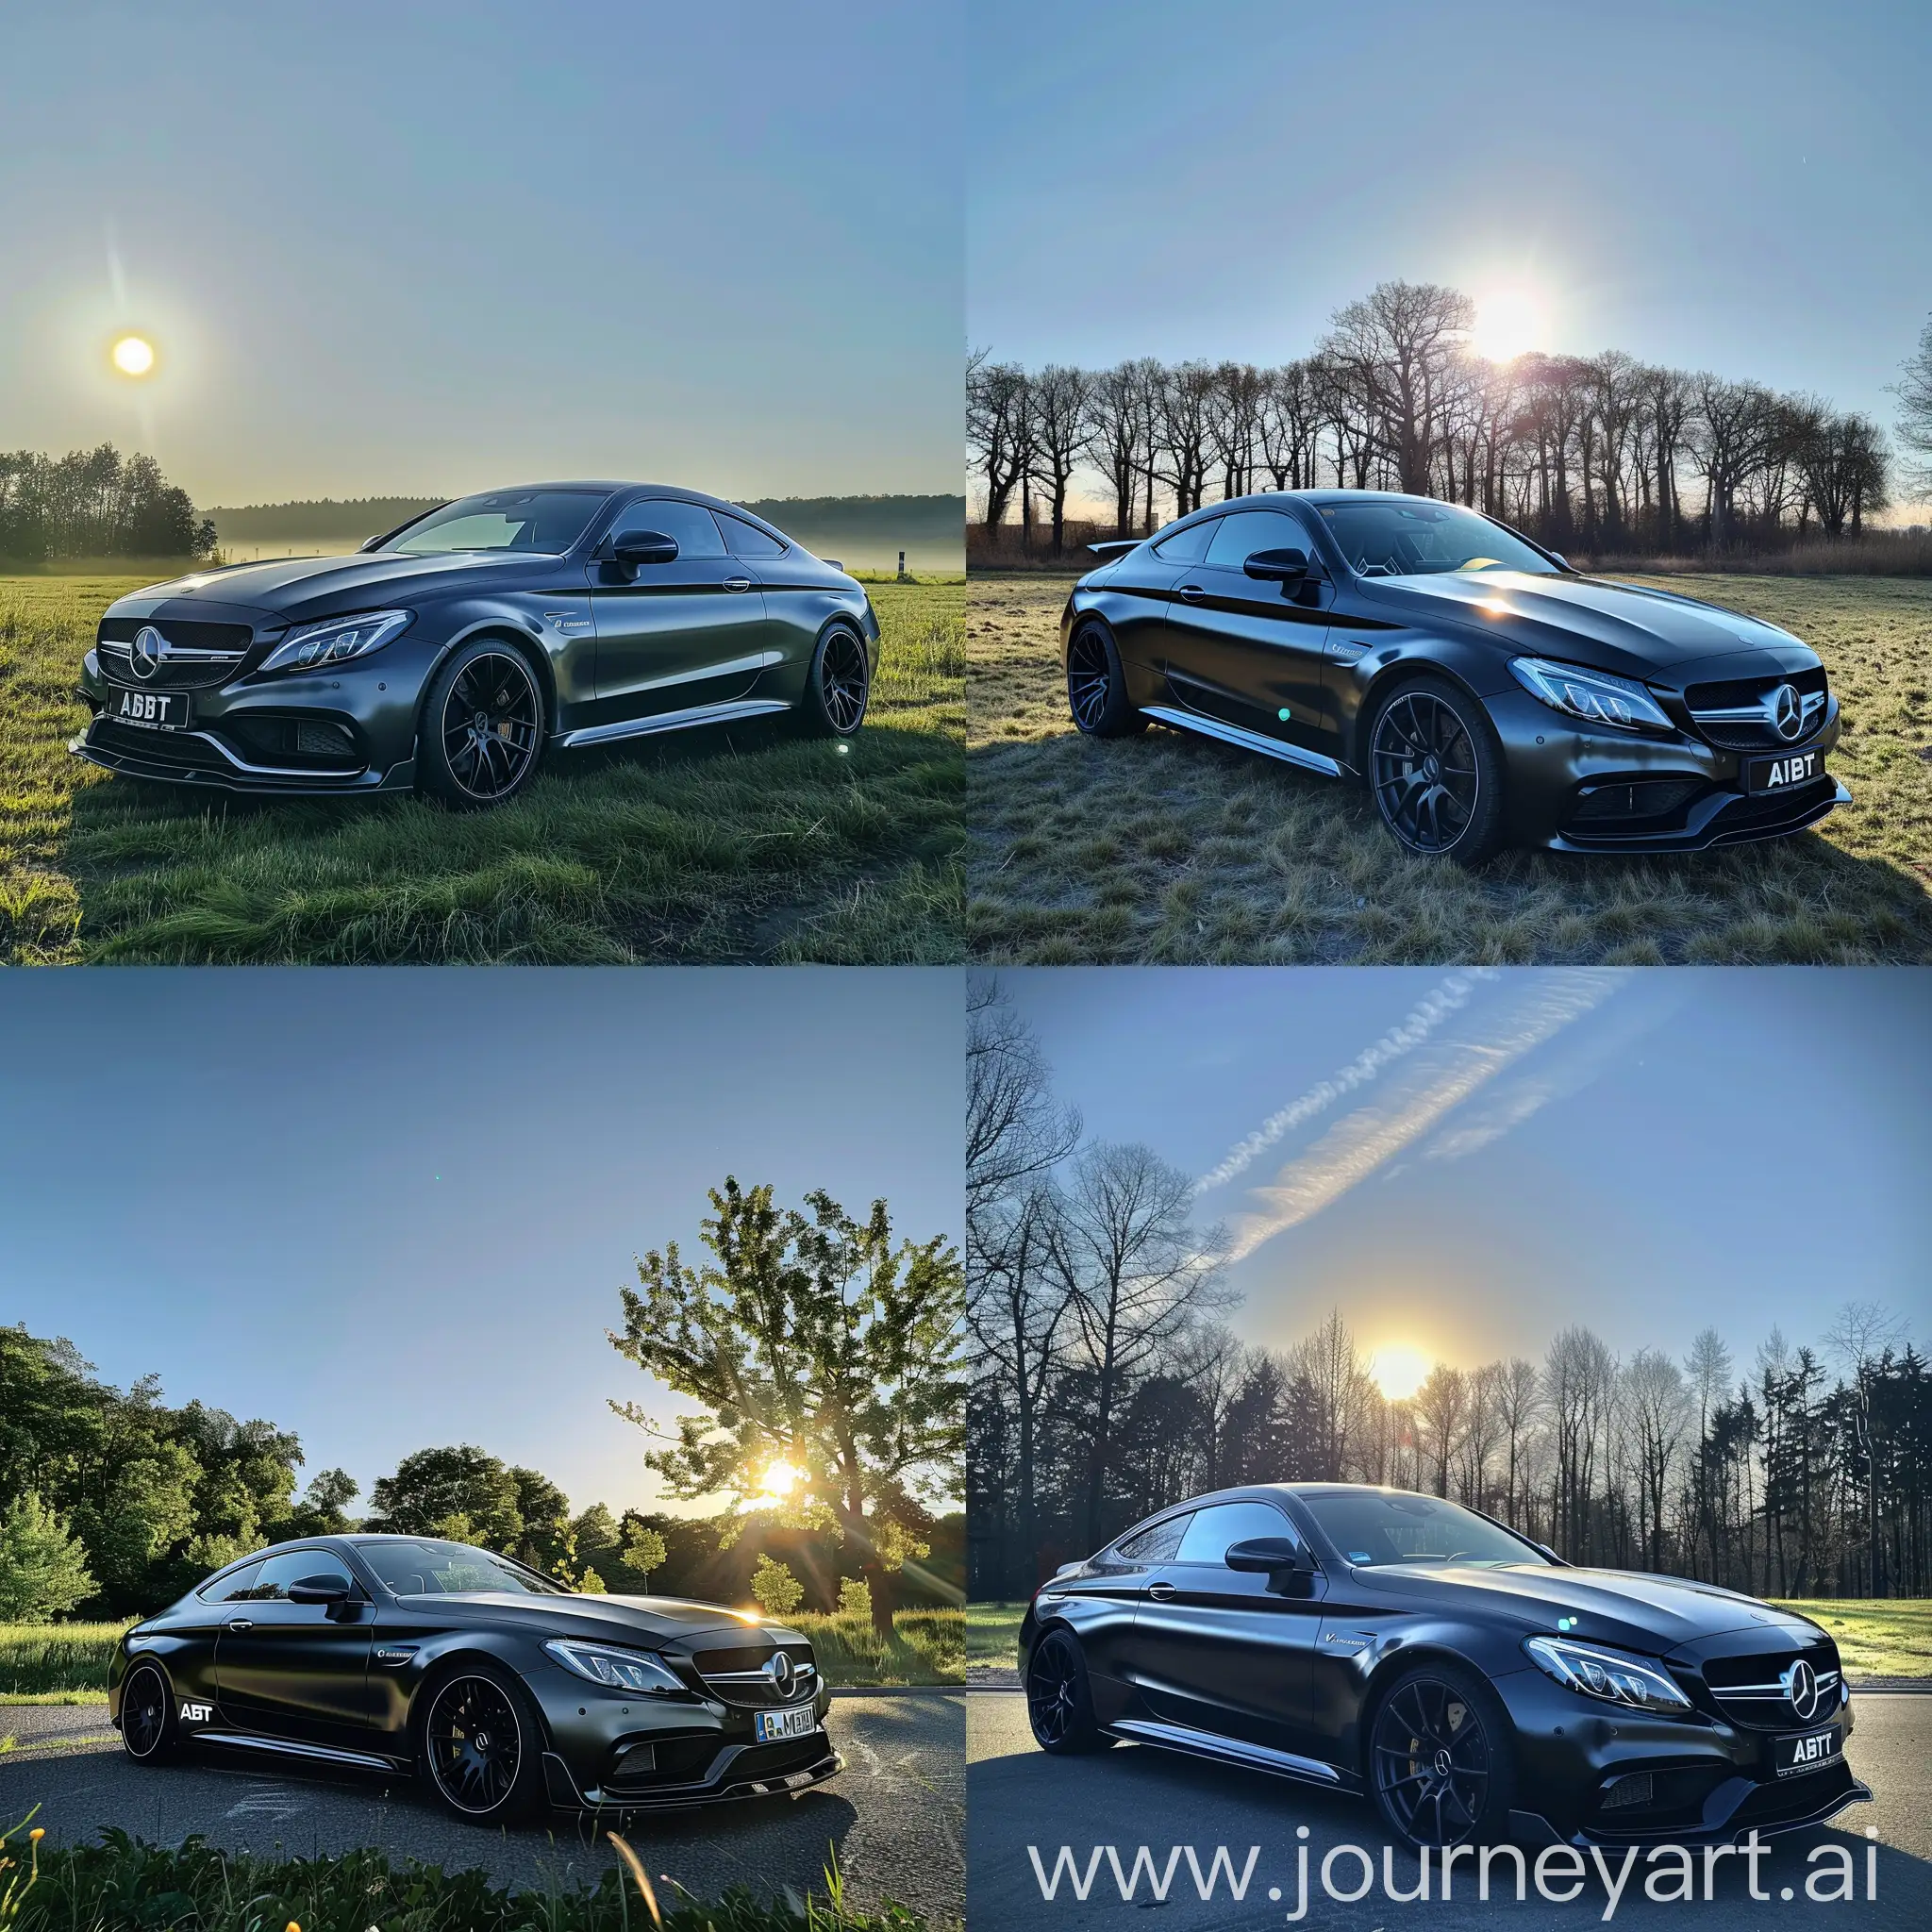 Realistic sun morning blue sky with a Mercedes c63 coupe amg 2016 mat black color full abt kit parked in Berlin morning summer vibes